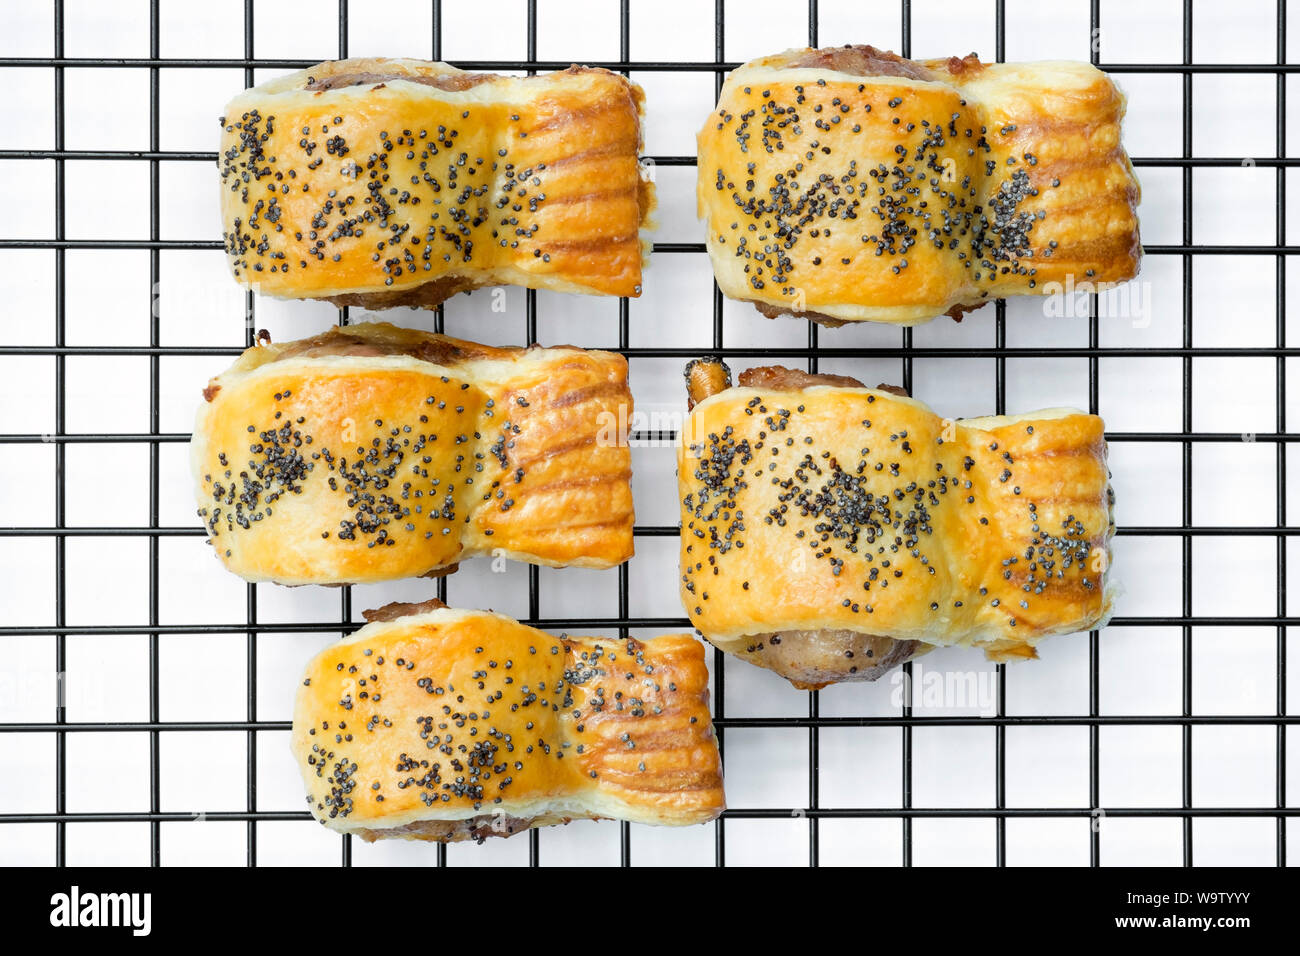 Sausage rolls with poppy seeds cooling on a wire rack, UK. Overhead view of five puff pastry sausage rolls. Stock Photo